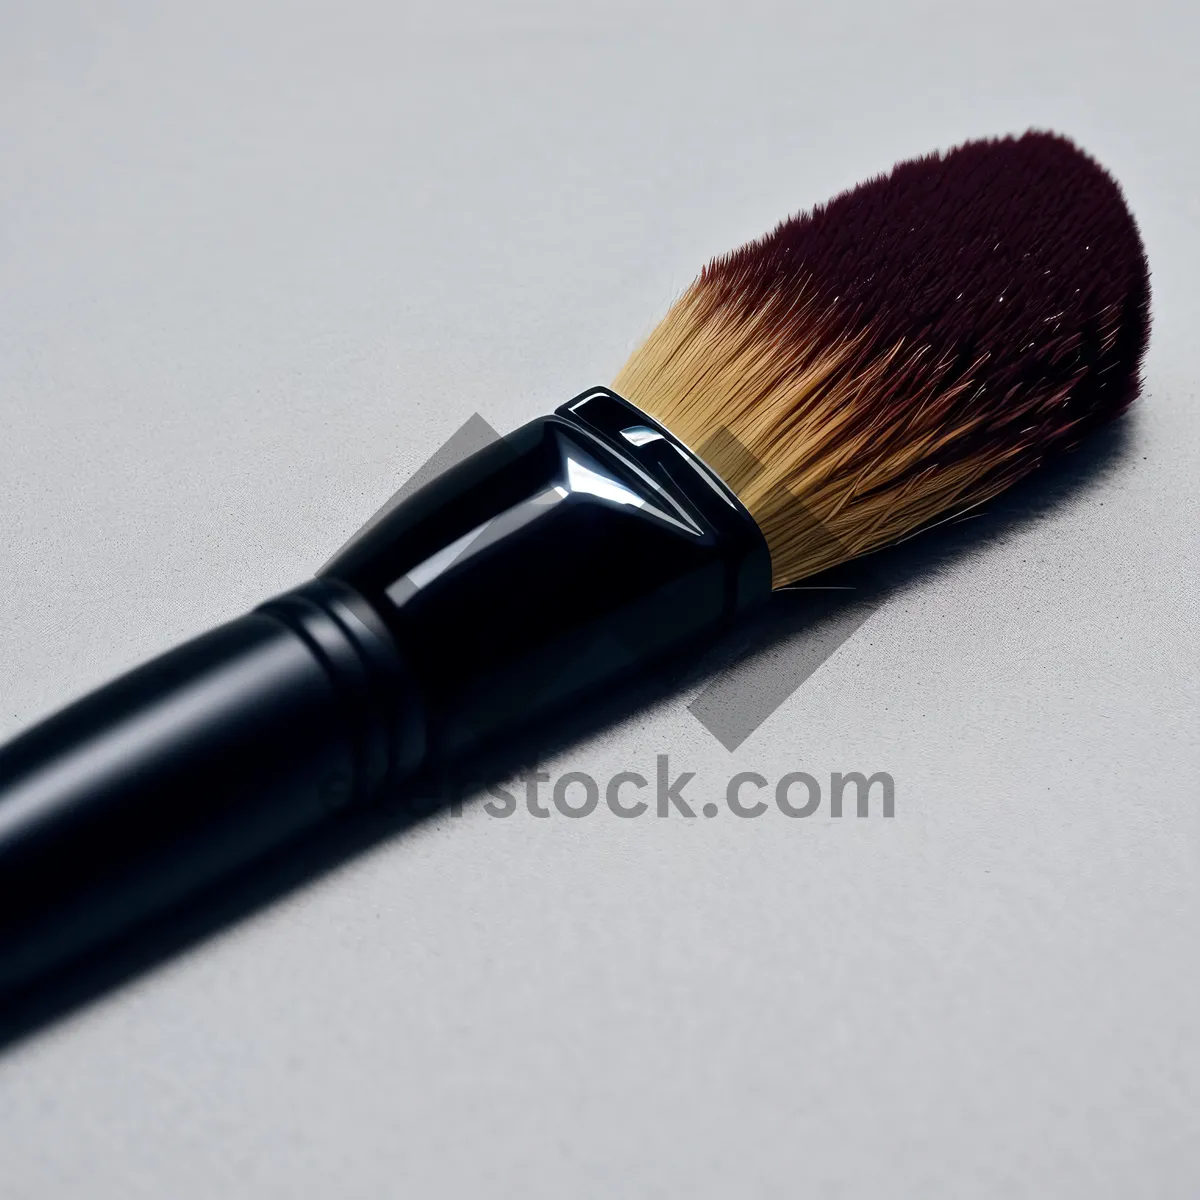 Picture of Multifunctional Makeup Brush for Artistic Color Application